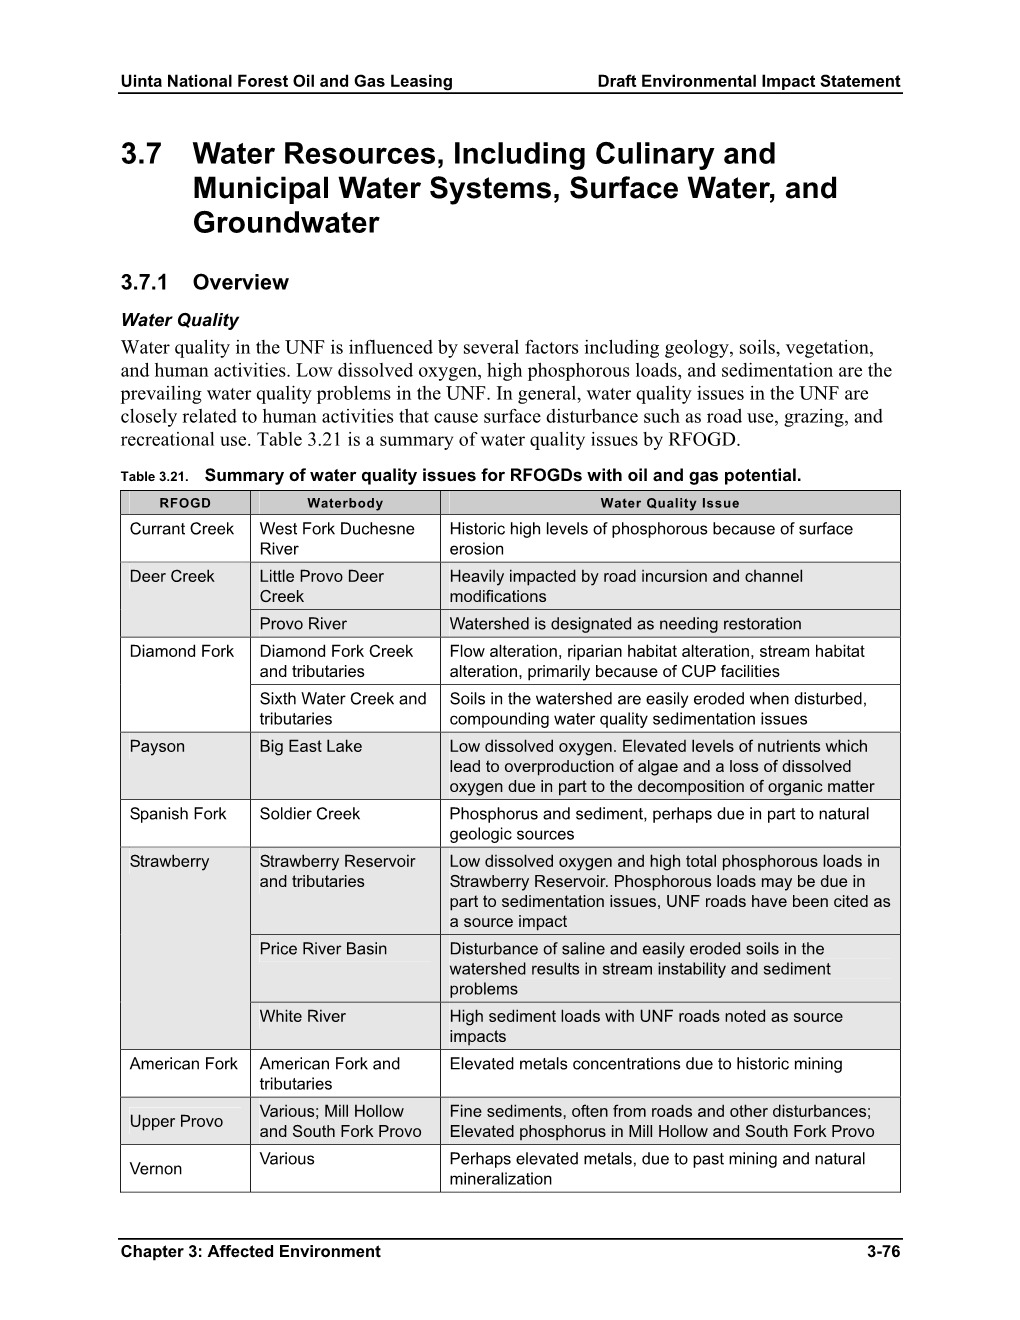 3.7 Water Resources, Including Culinary and Municipal Water Systems, Surface Water, and Groundwater